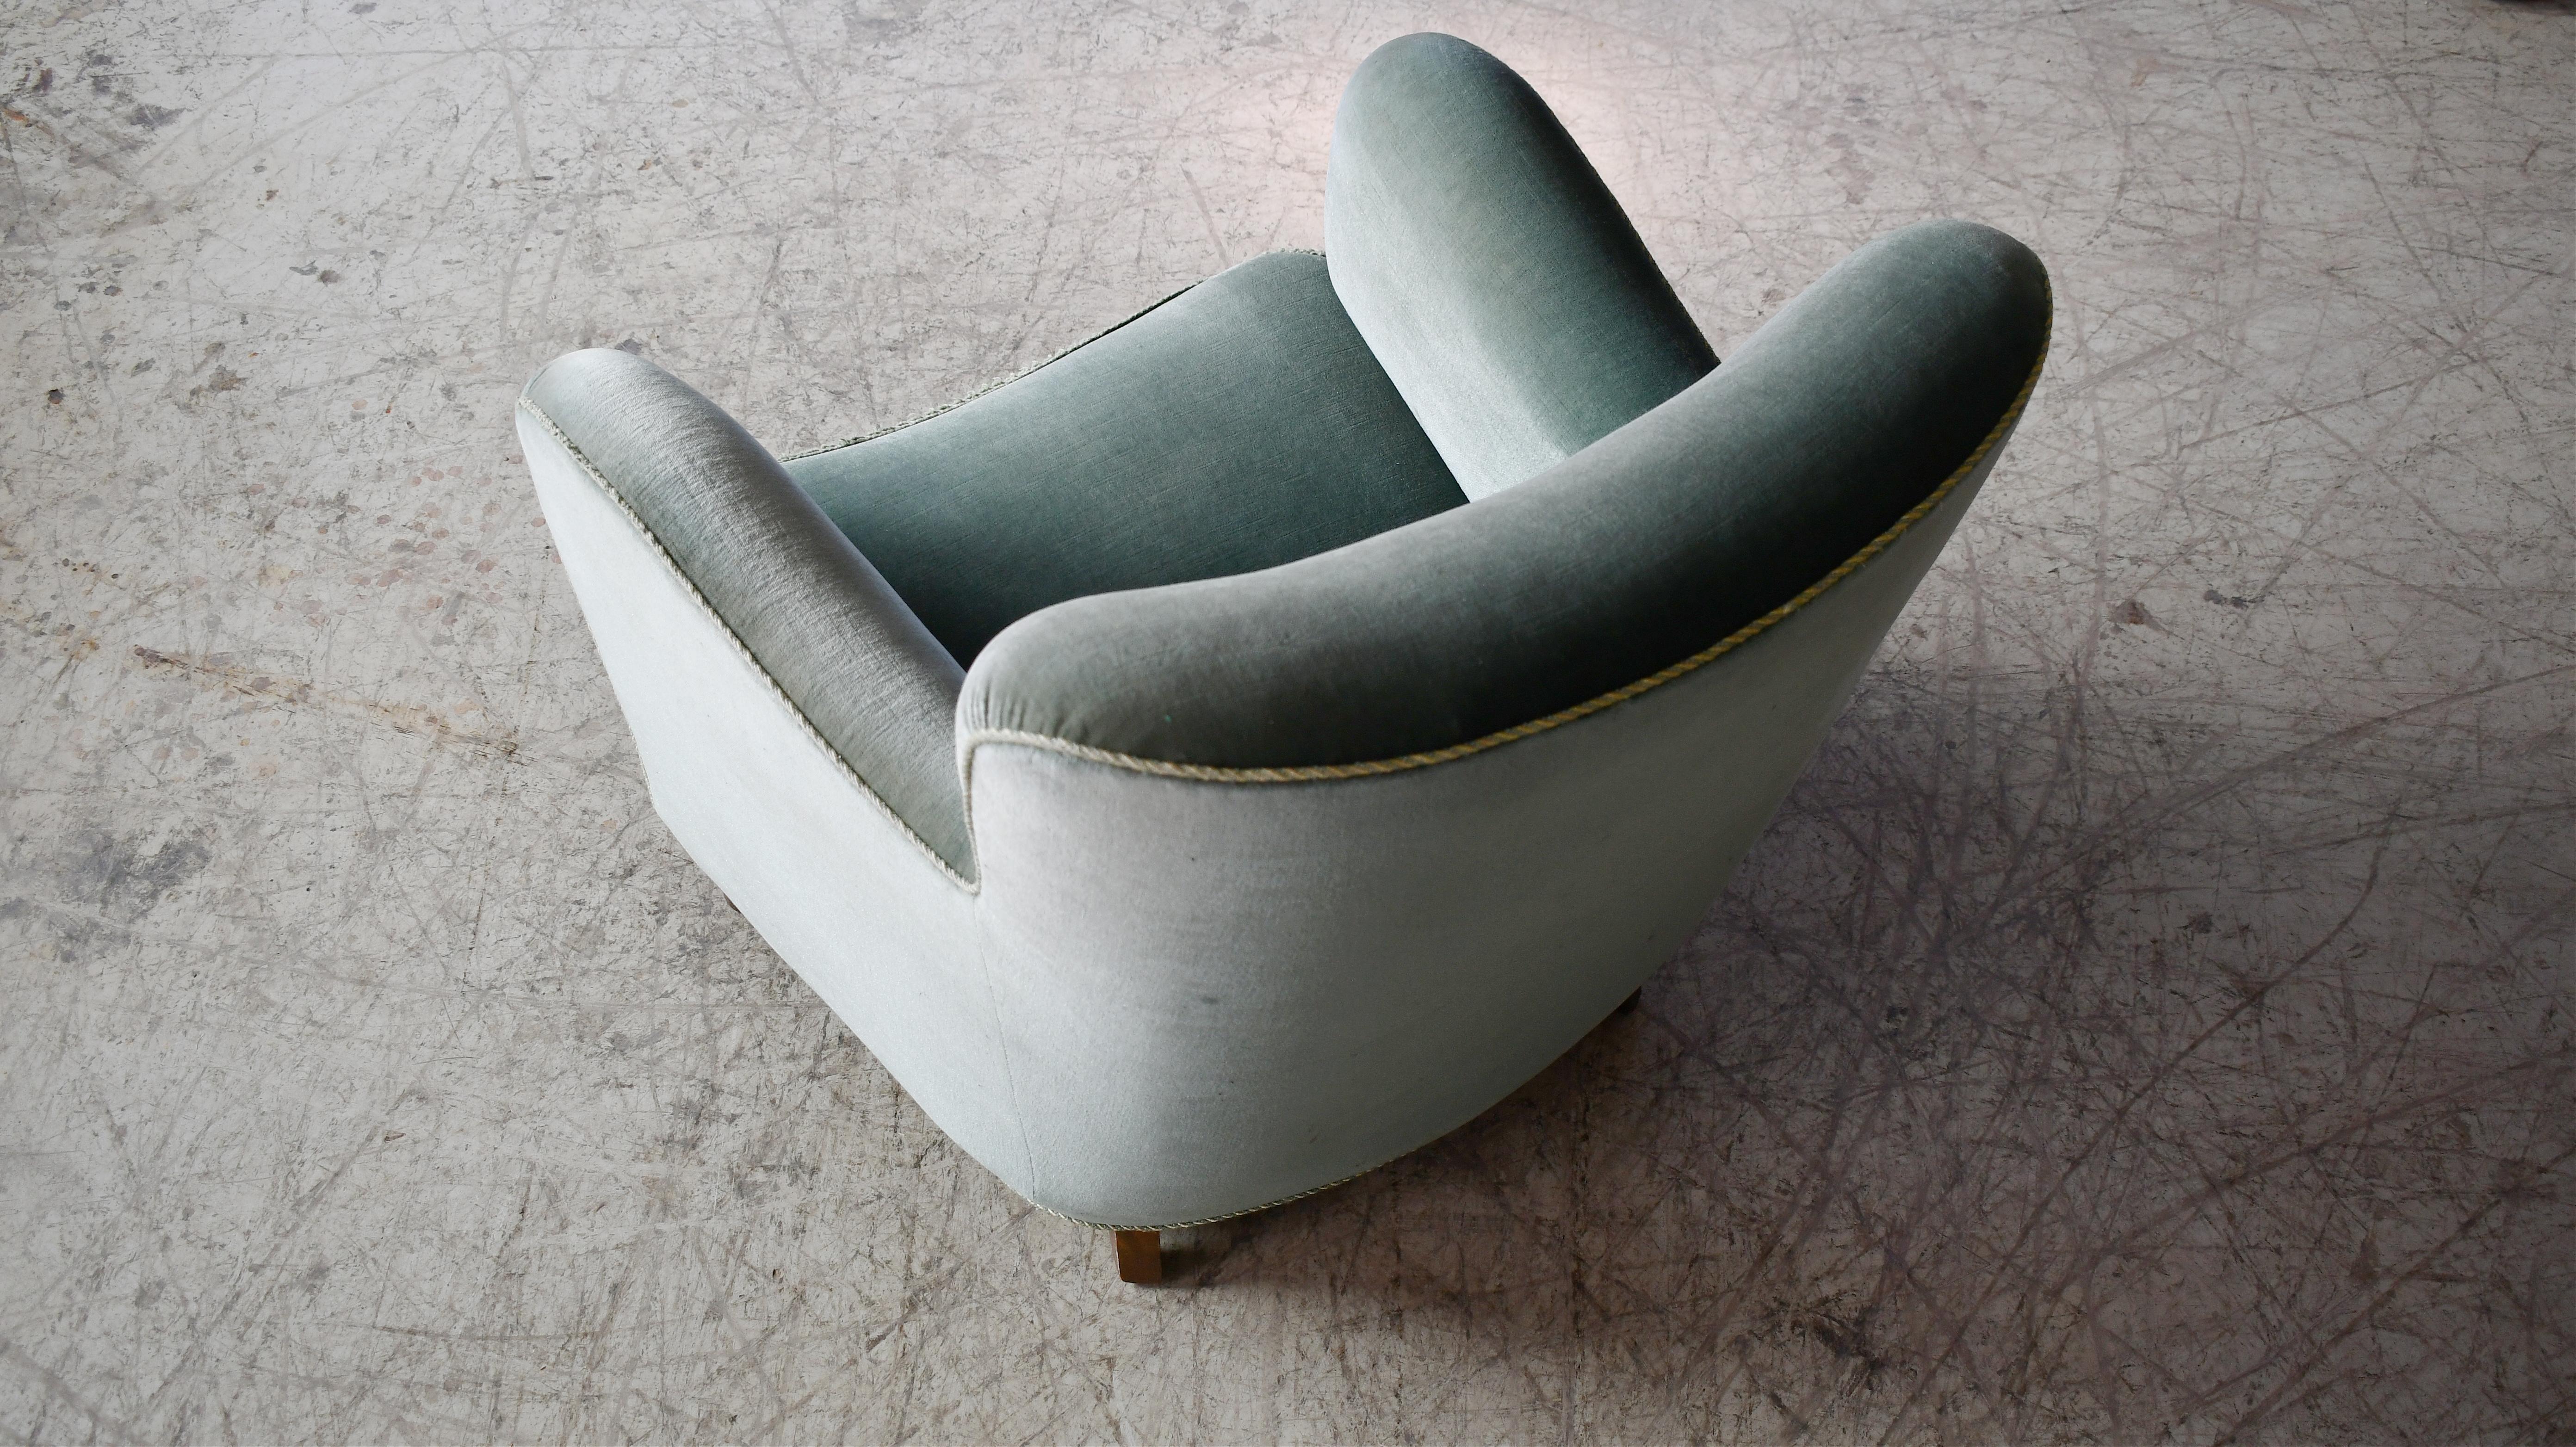 Danish Art Deco or Early Midcentury Lounge Chair in Green Mohair 1930-40s For Sale 1